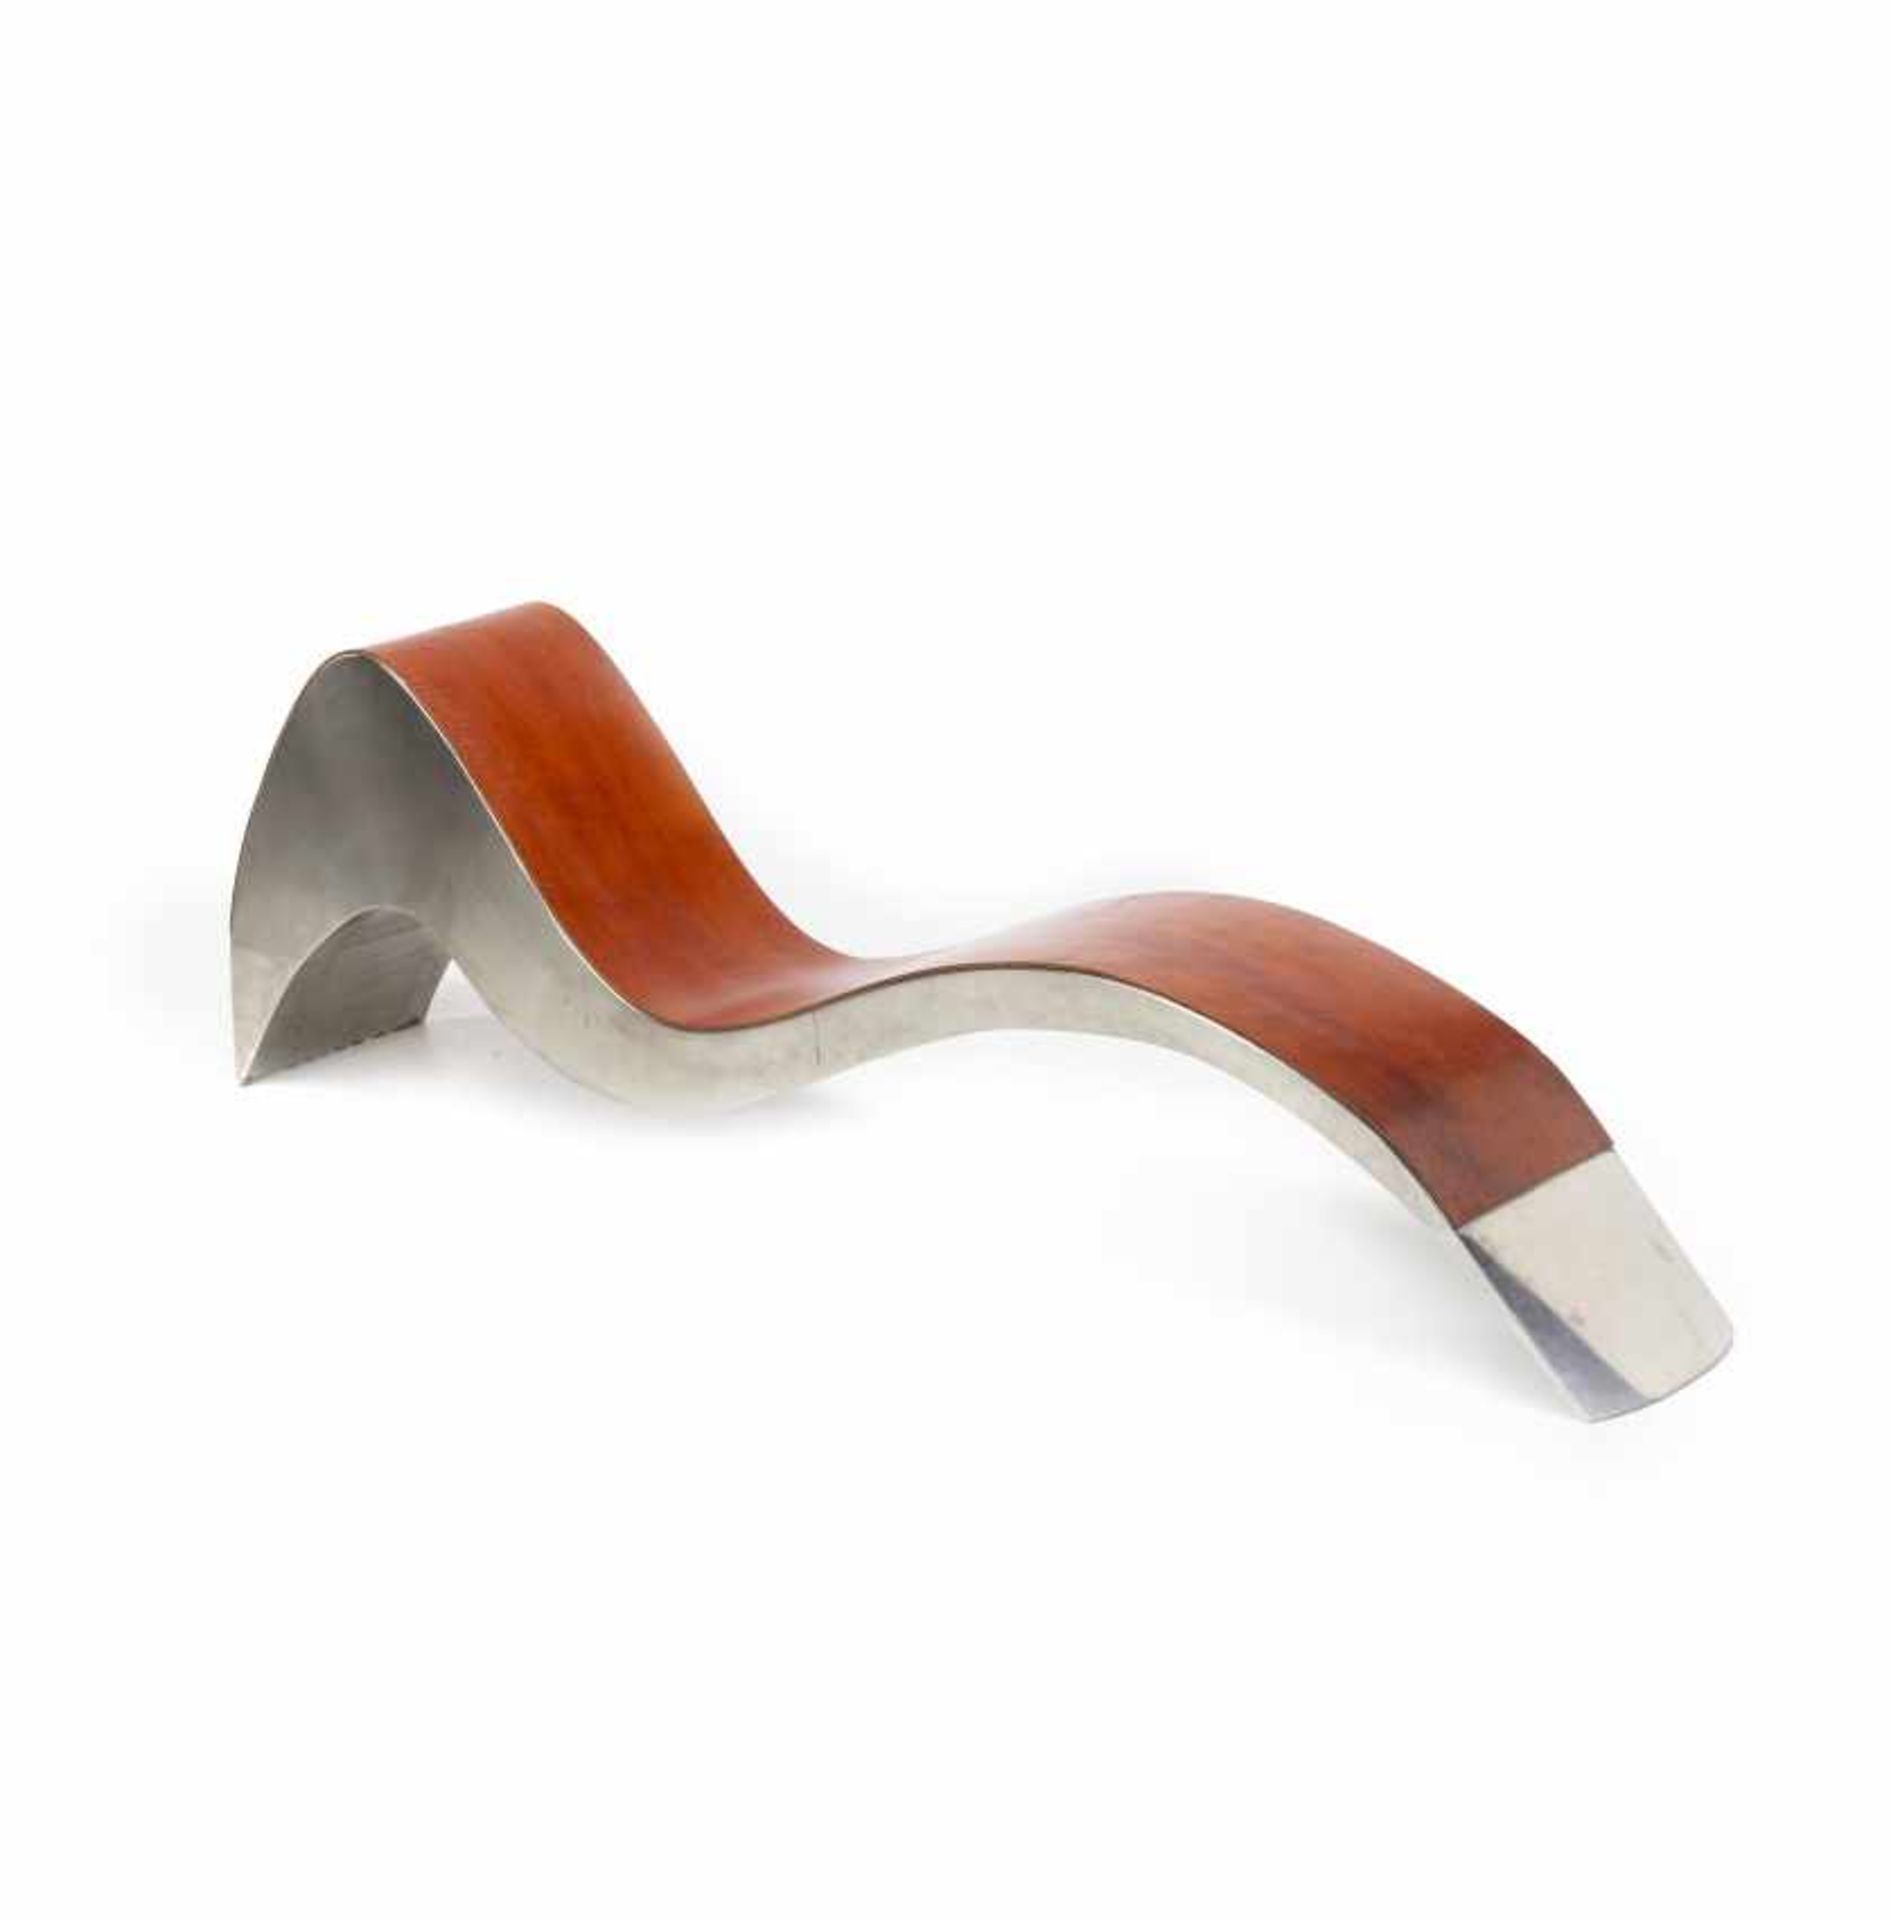 "Wave" chaise longue in chromed steel and leather, design a"Wave" chaise longue in chromed steel and